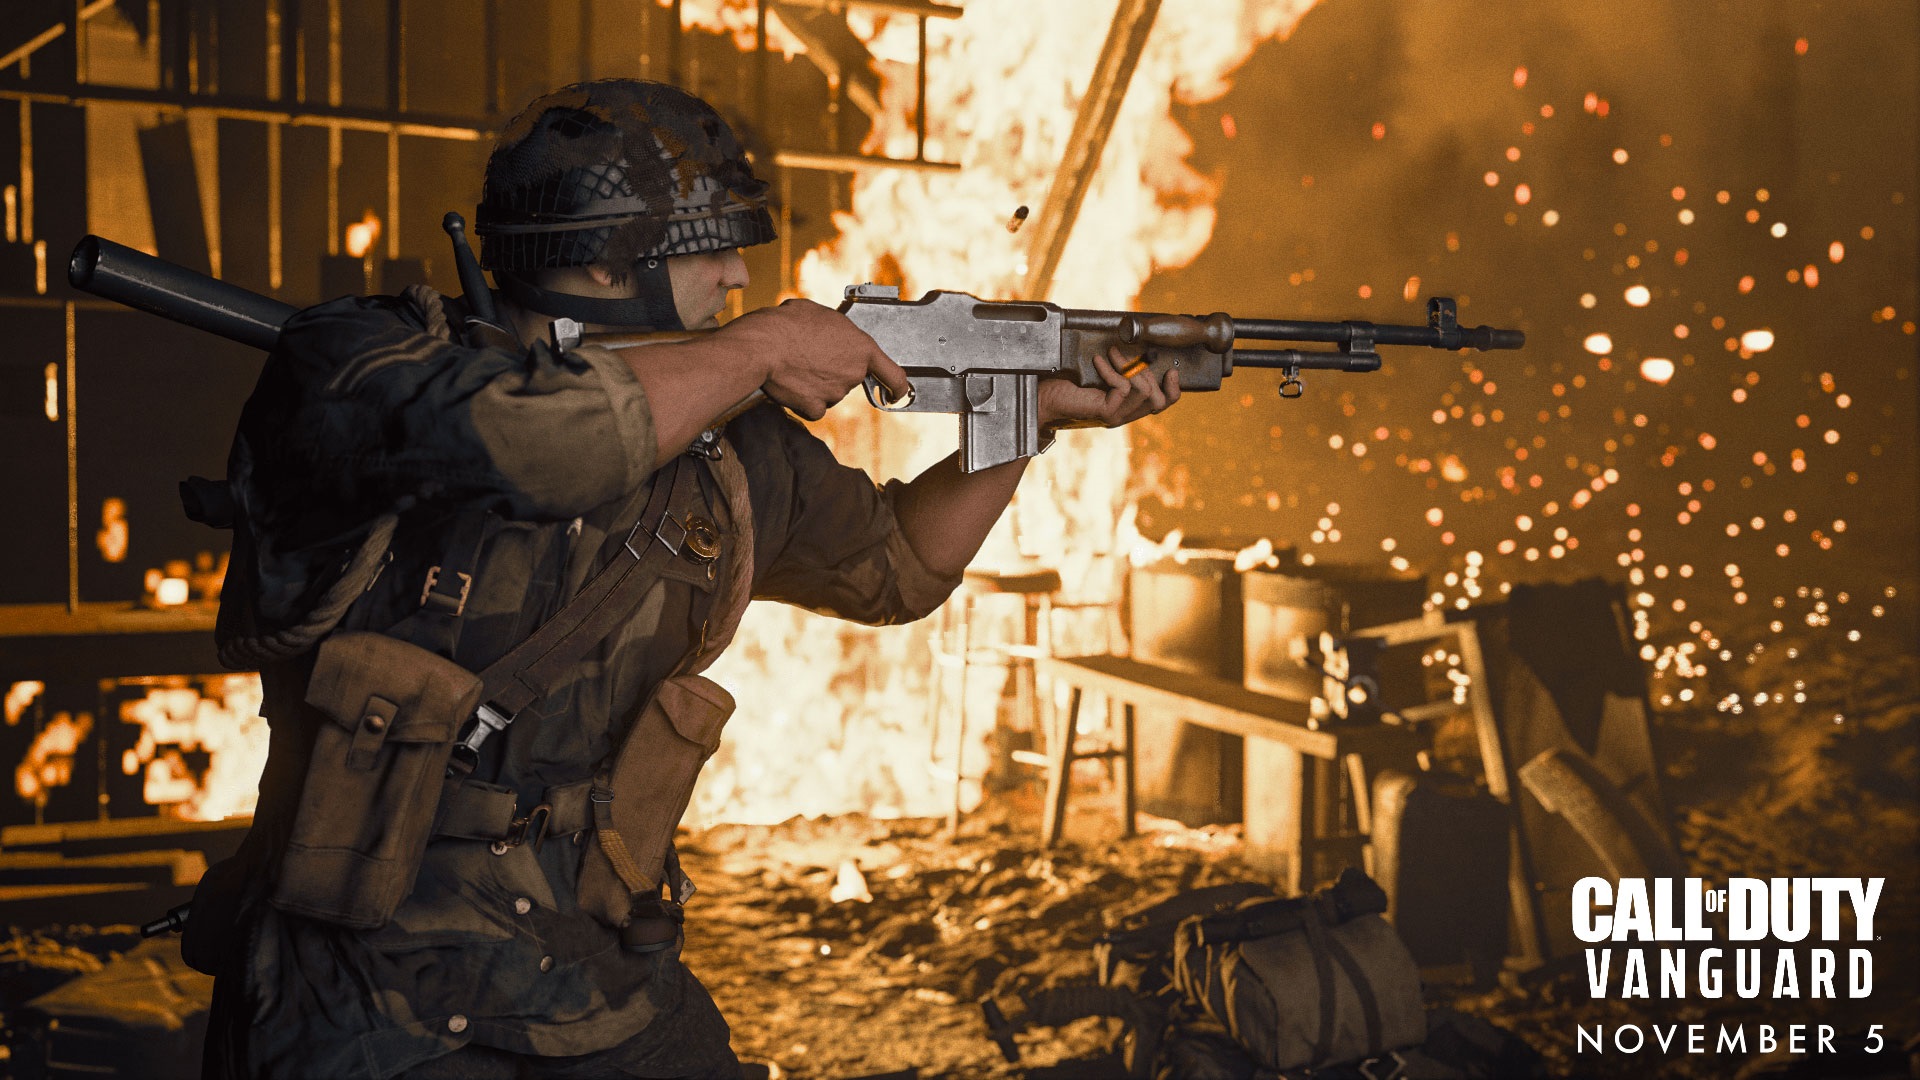 Call of Duty Modern Warfare II PC system requirements, pre-load dates  revealed